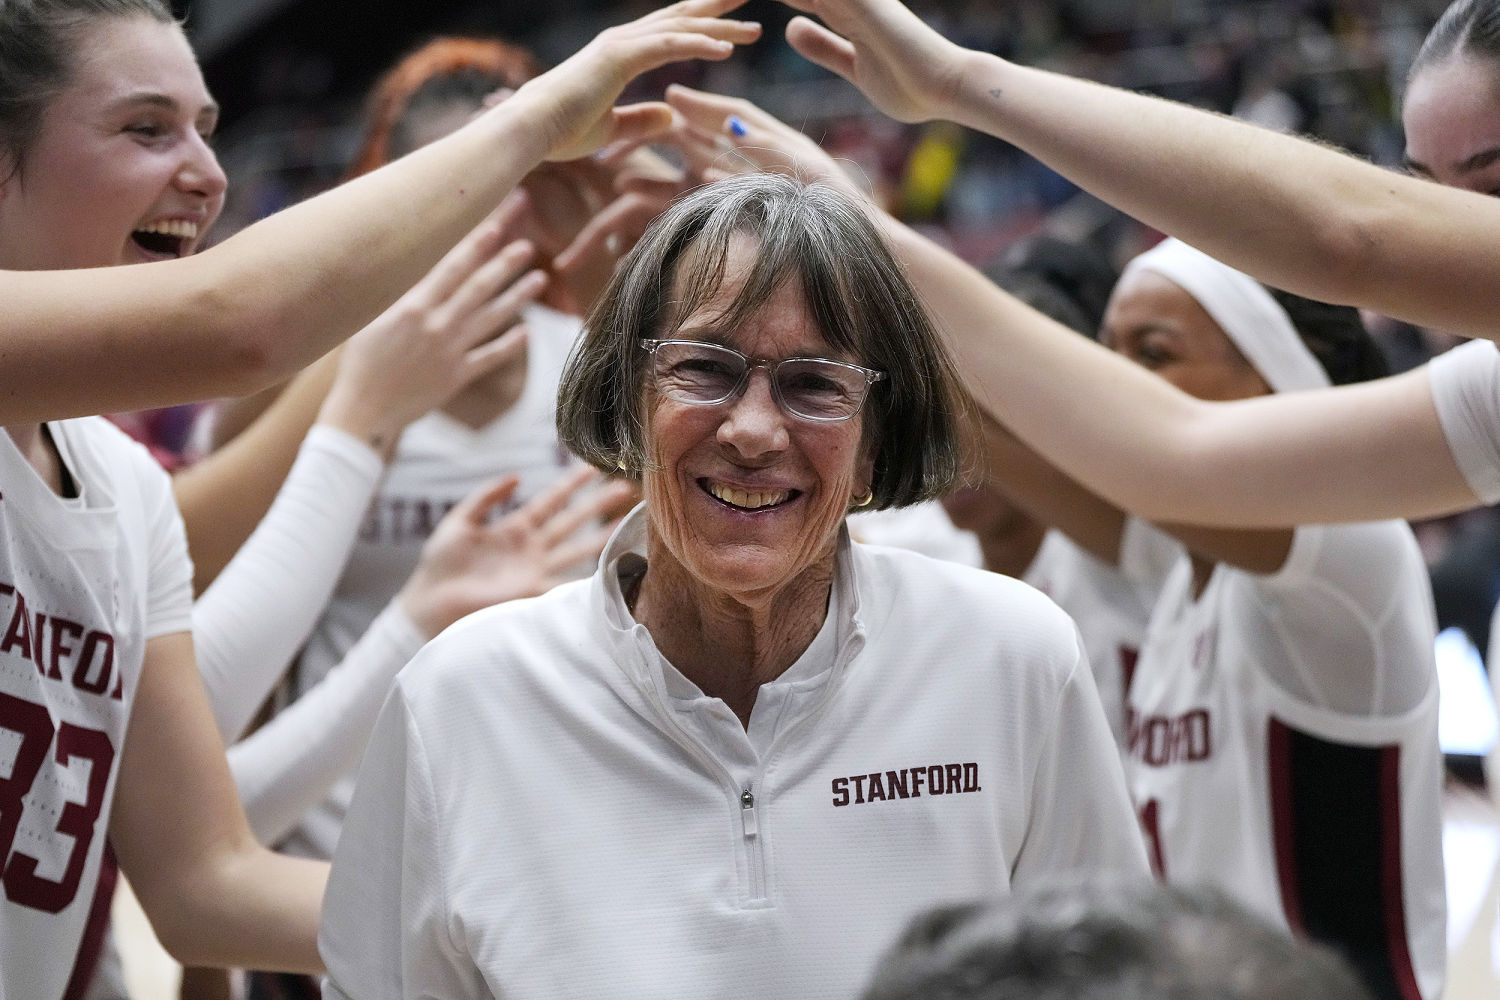 Stanford coach Tara VanDerveer now has the most wins in college basketball history